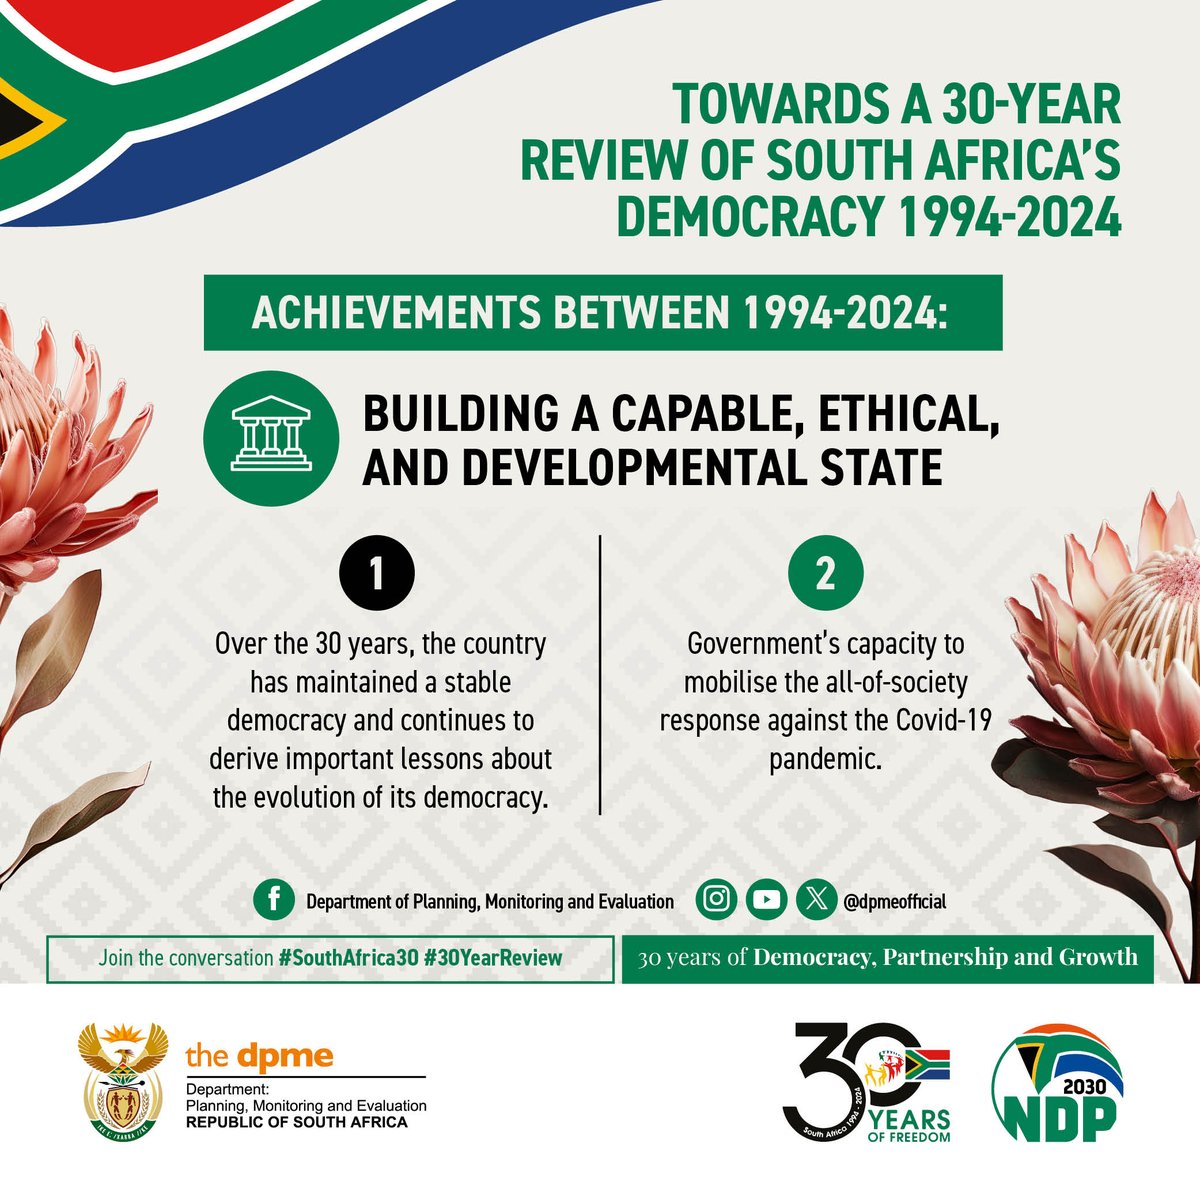 Over the #30YearsOfDemocracy, South Africa has maintained a stable democracy and continues to derive important lessons about the evolution of its democracy.

#SouthAfrica30 🇿🇦 
#30YearReview 
#30YearsOfDemocracy